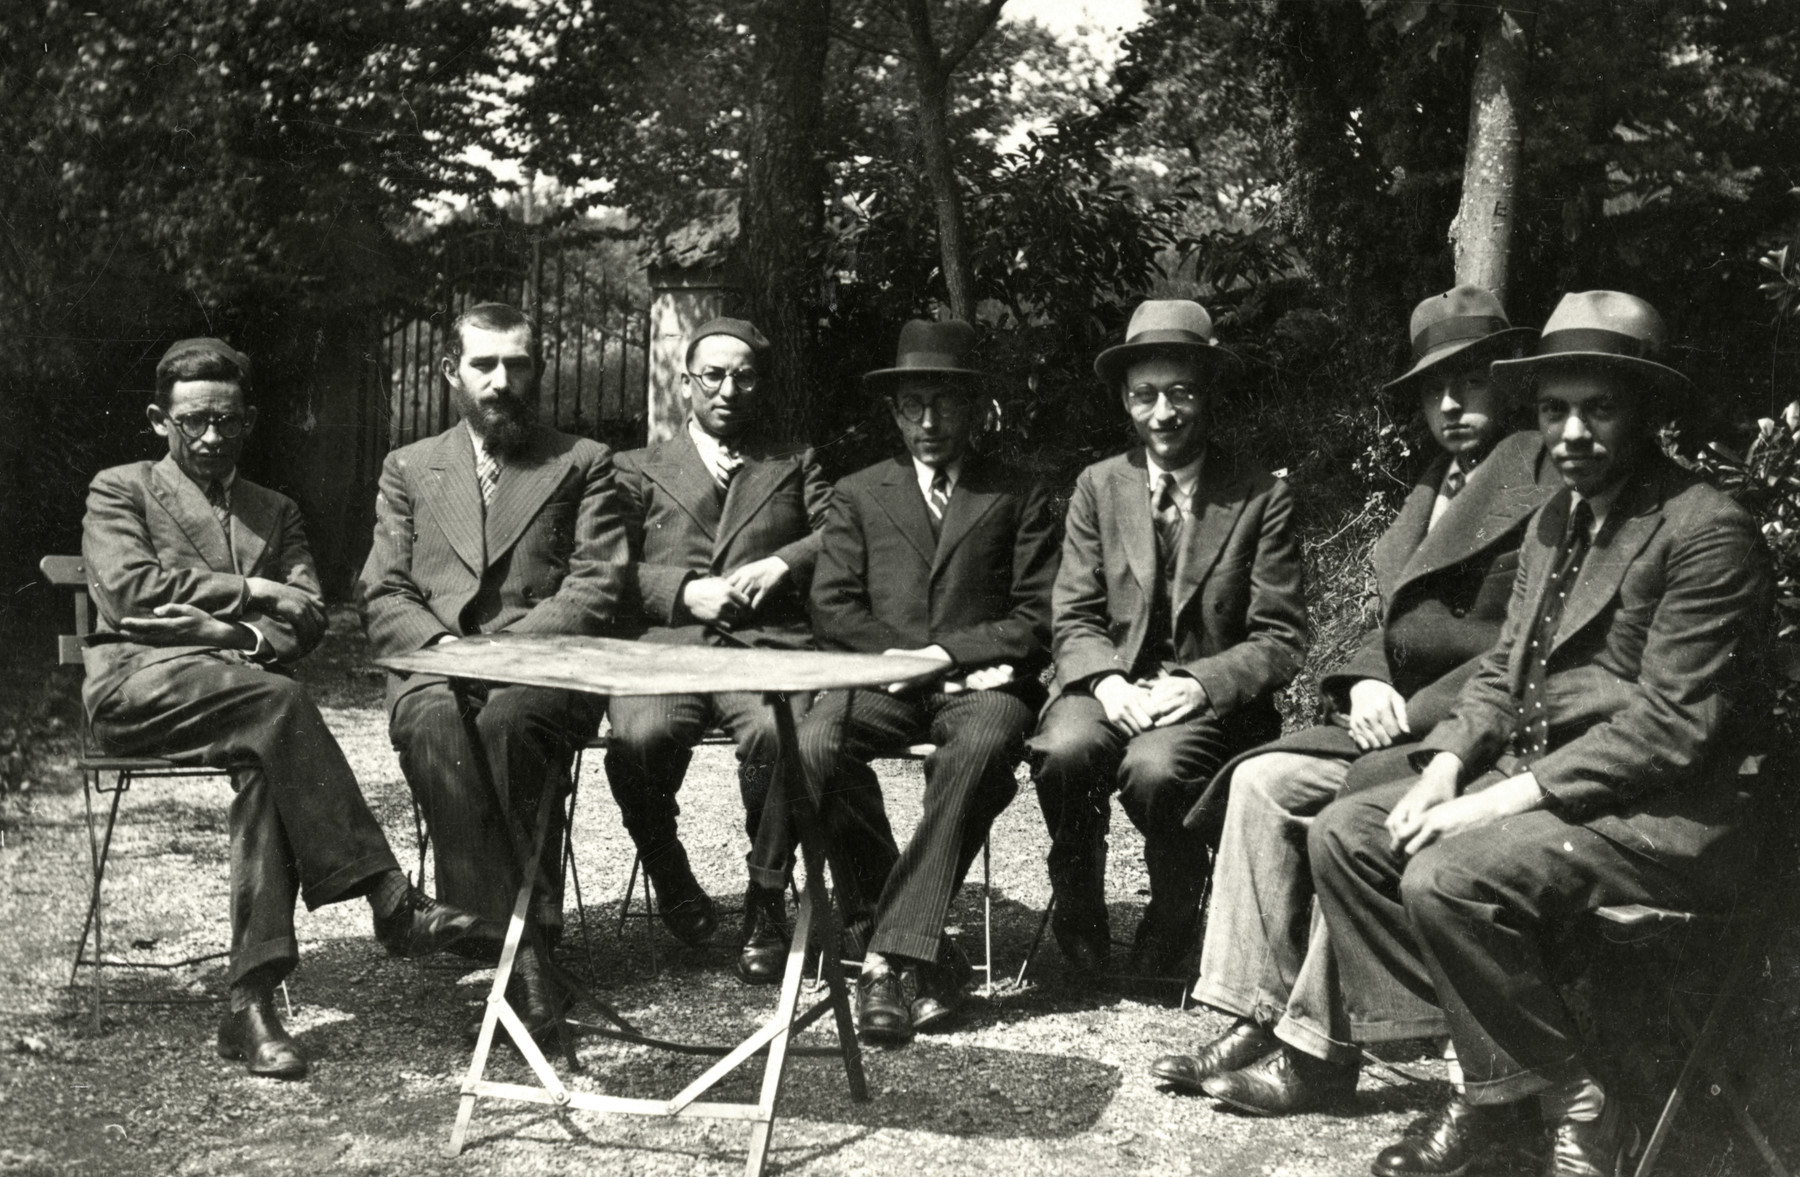 Group portrait of rabbinical students or young rabbis [probably in France].

Rabbi Moise Cassorla is seated third from the left.